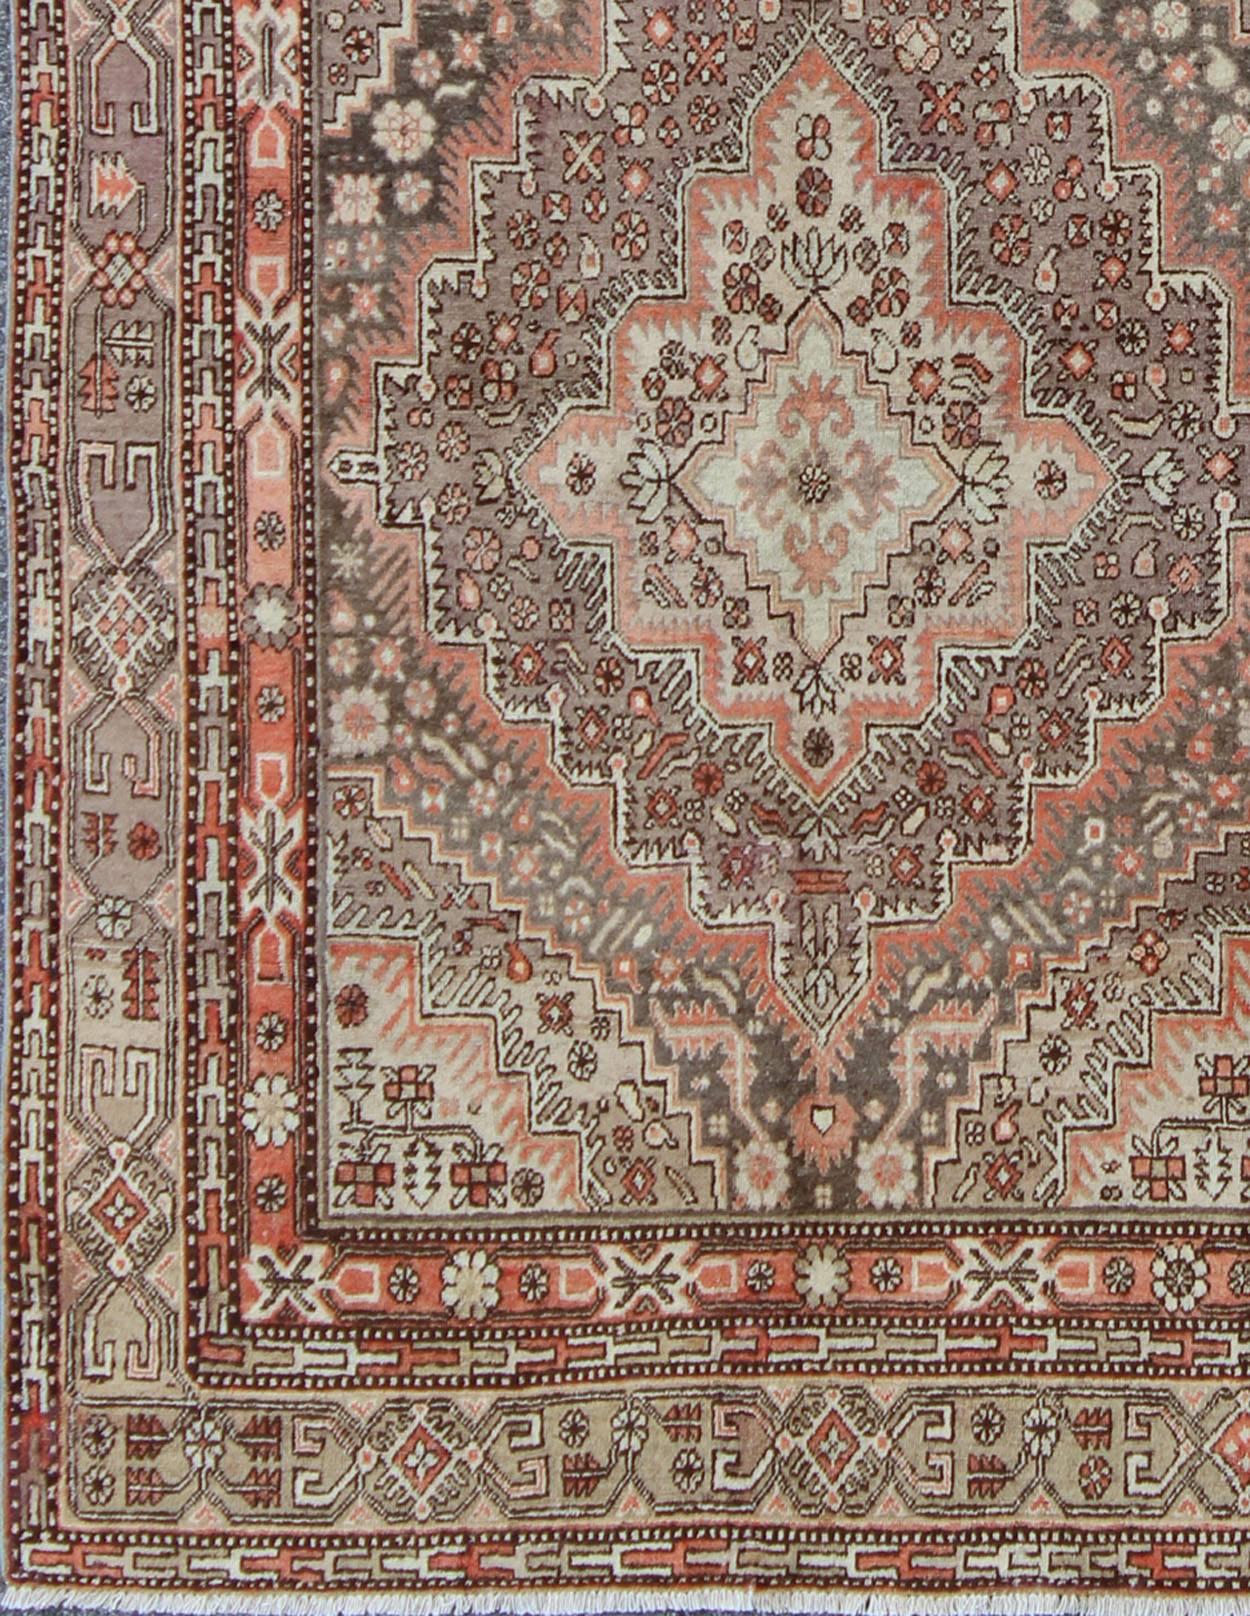 This beautiful Khotan rug from East Turkestan has a wonderful, light purple border that imbues it with an Asian aesthetic. The border is encased by two guard borders, featuring a multicolored Greek key design. The field has two large medallions